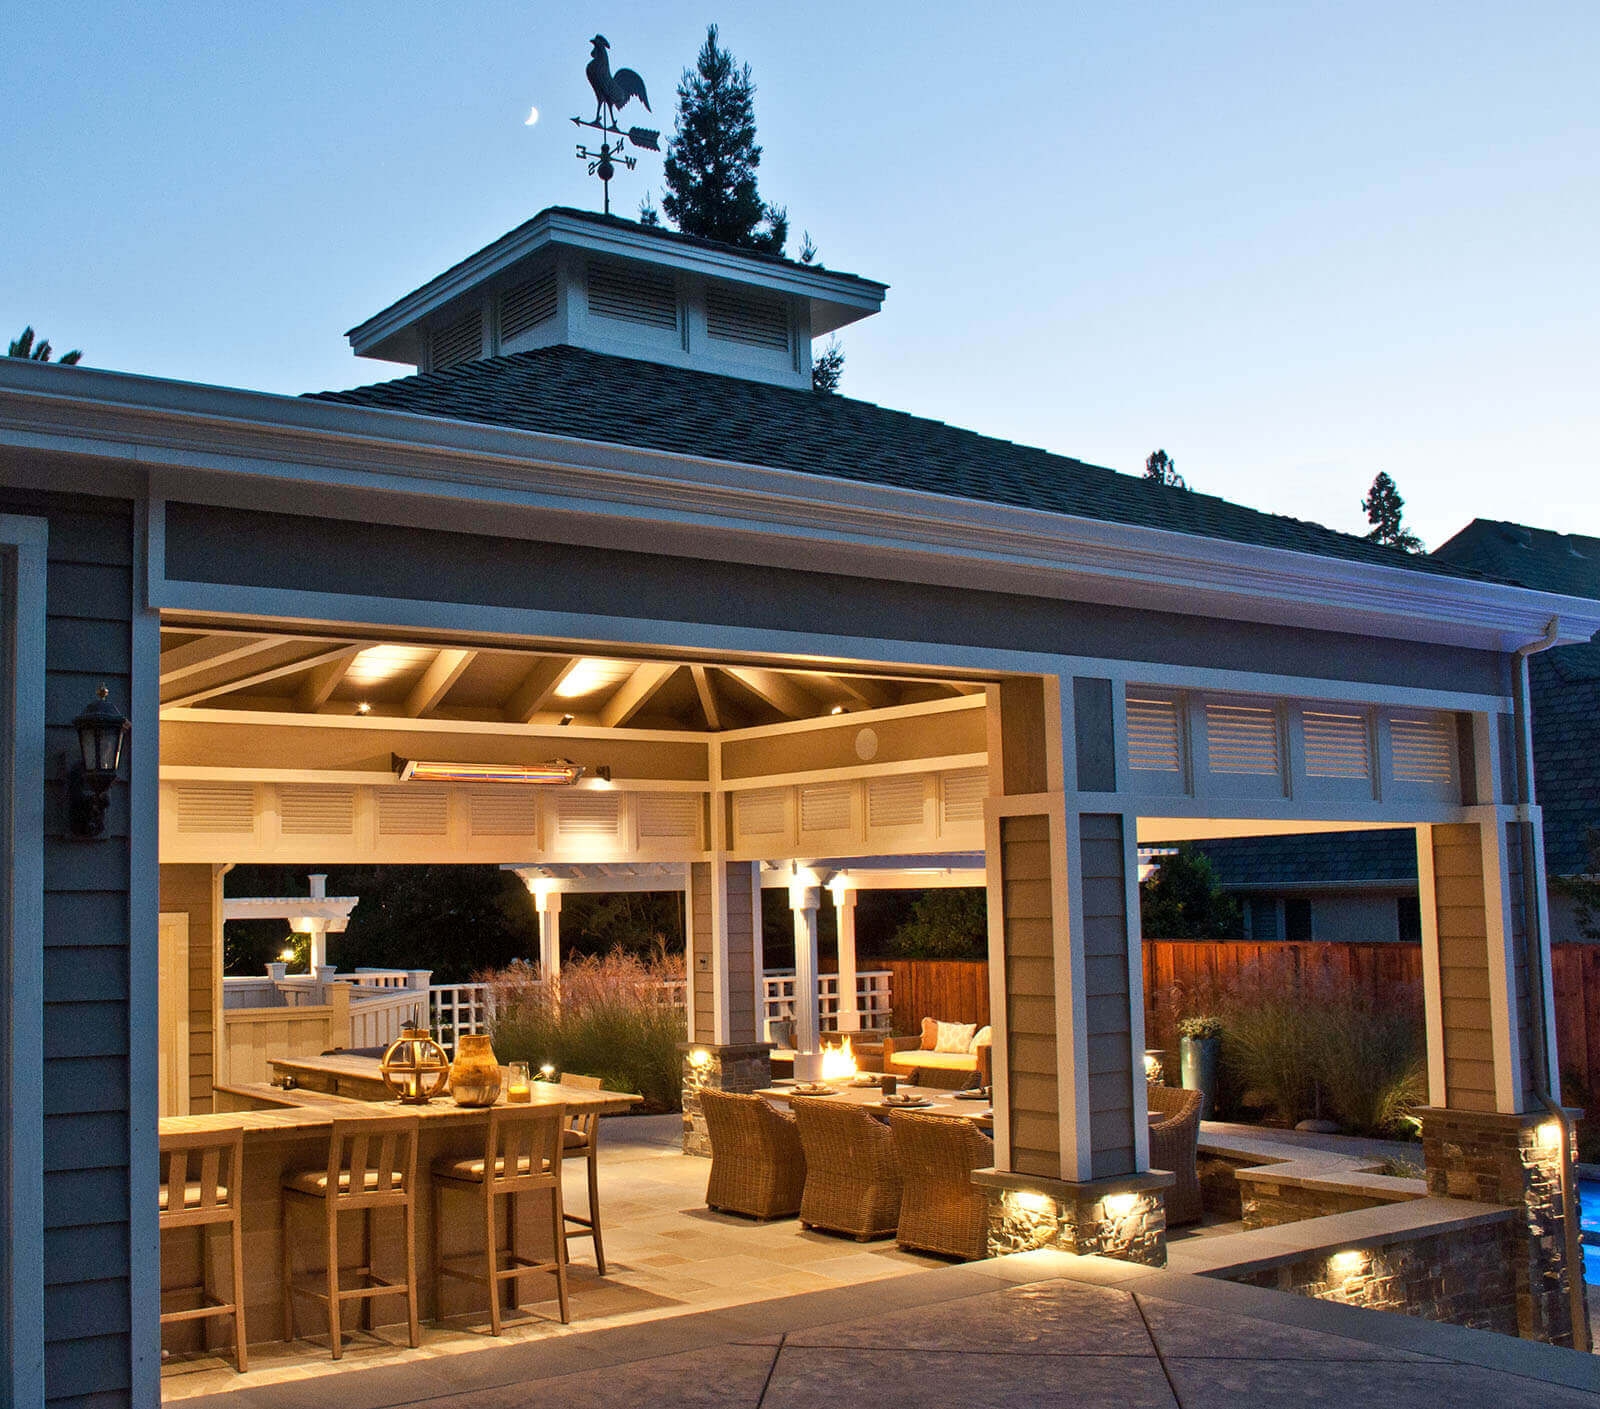 Warm ambient lighting for covered outdoor veranda, with light fixtures at base of columns